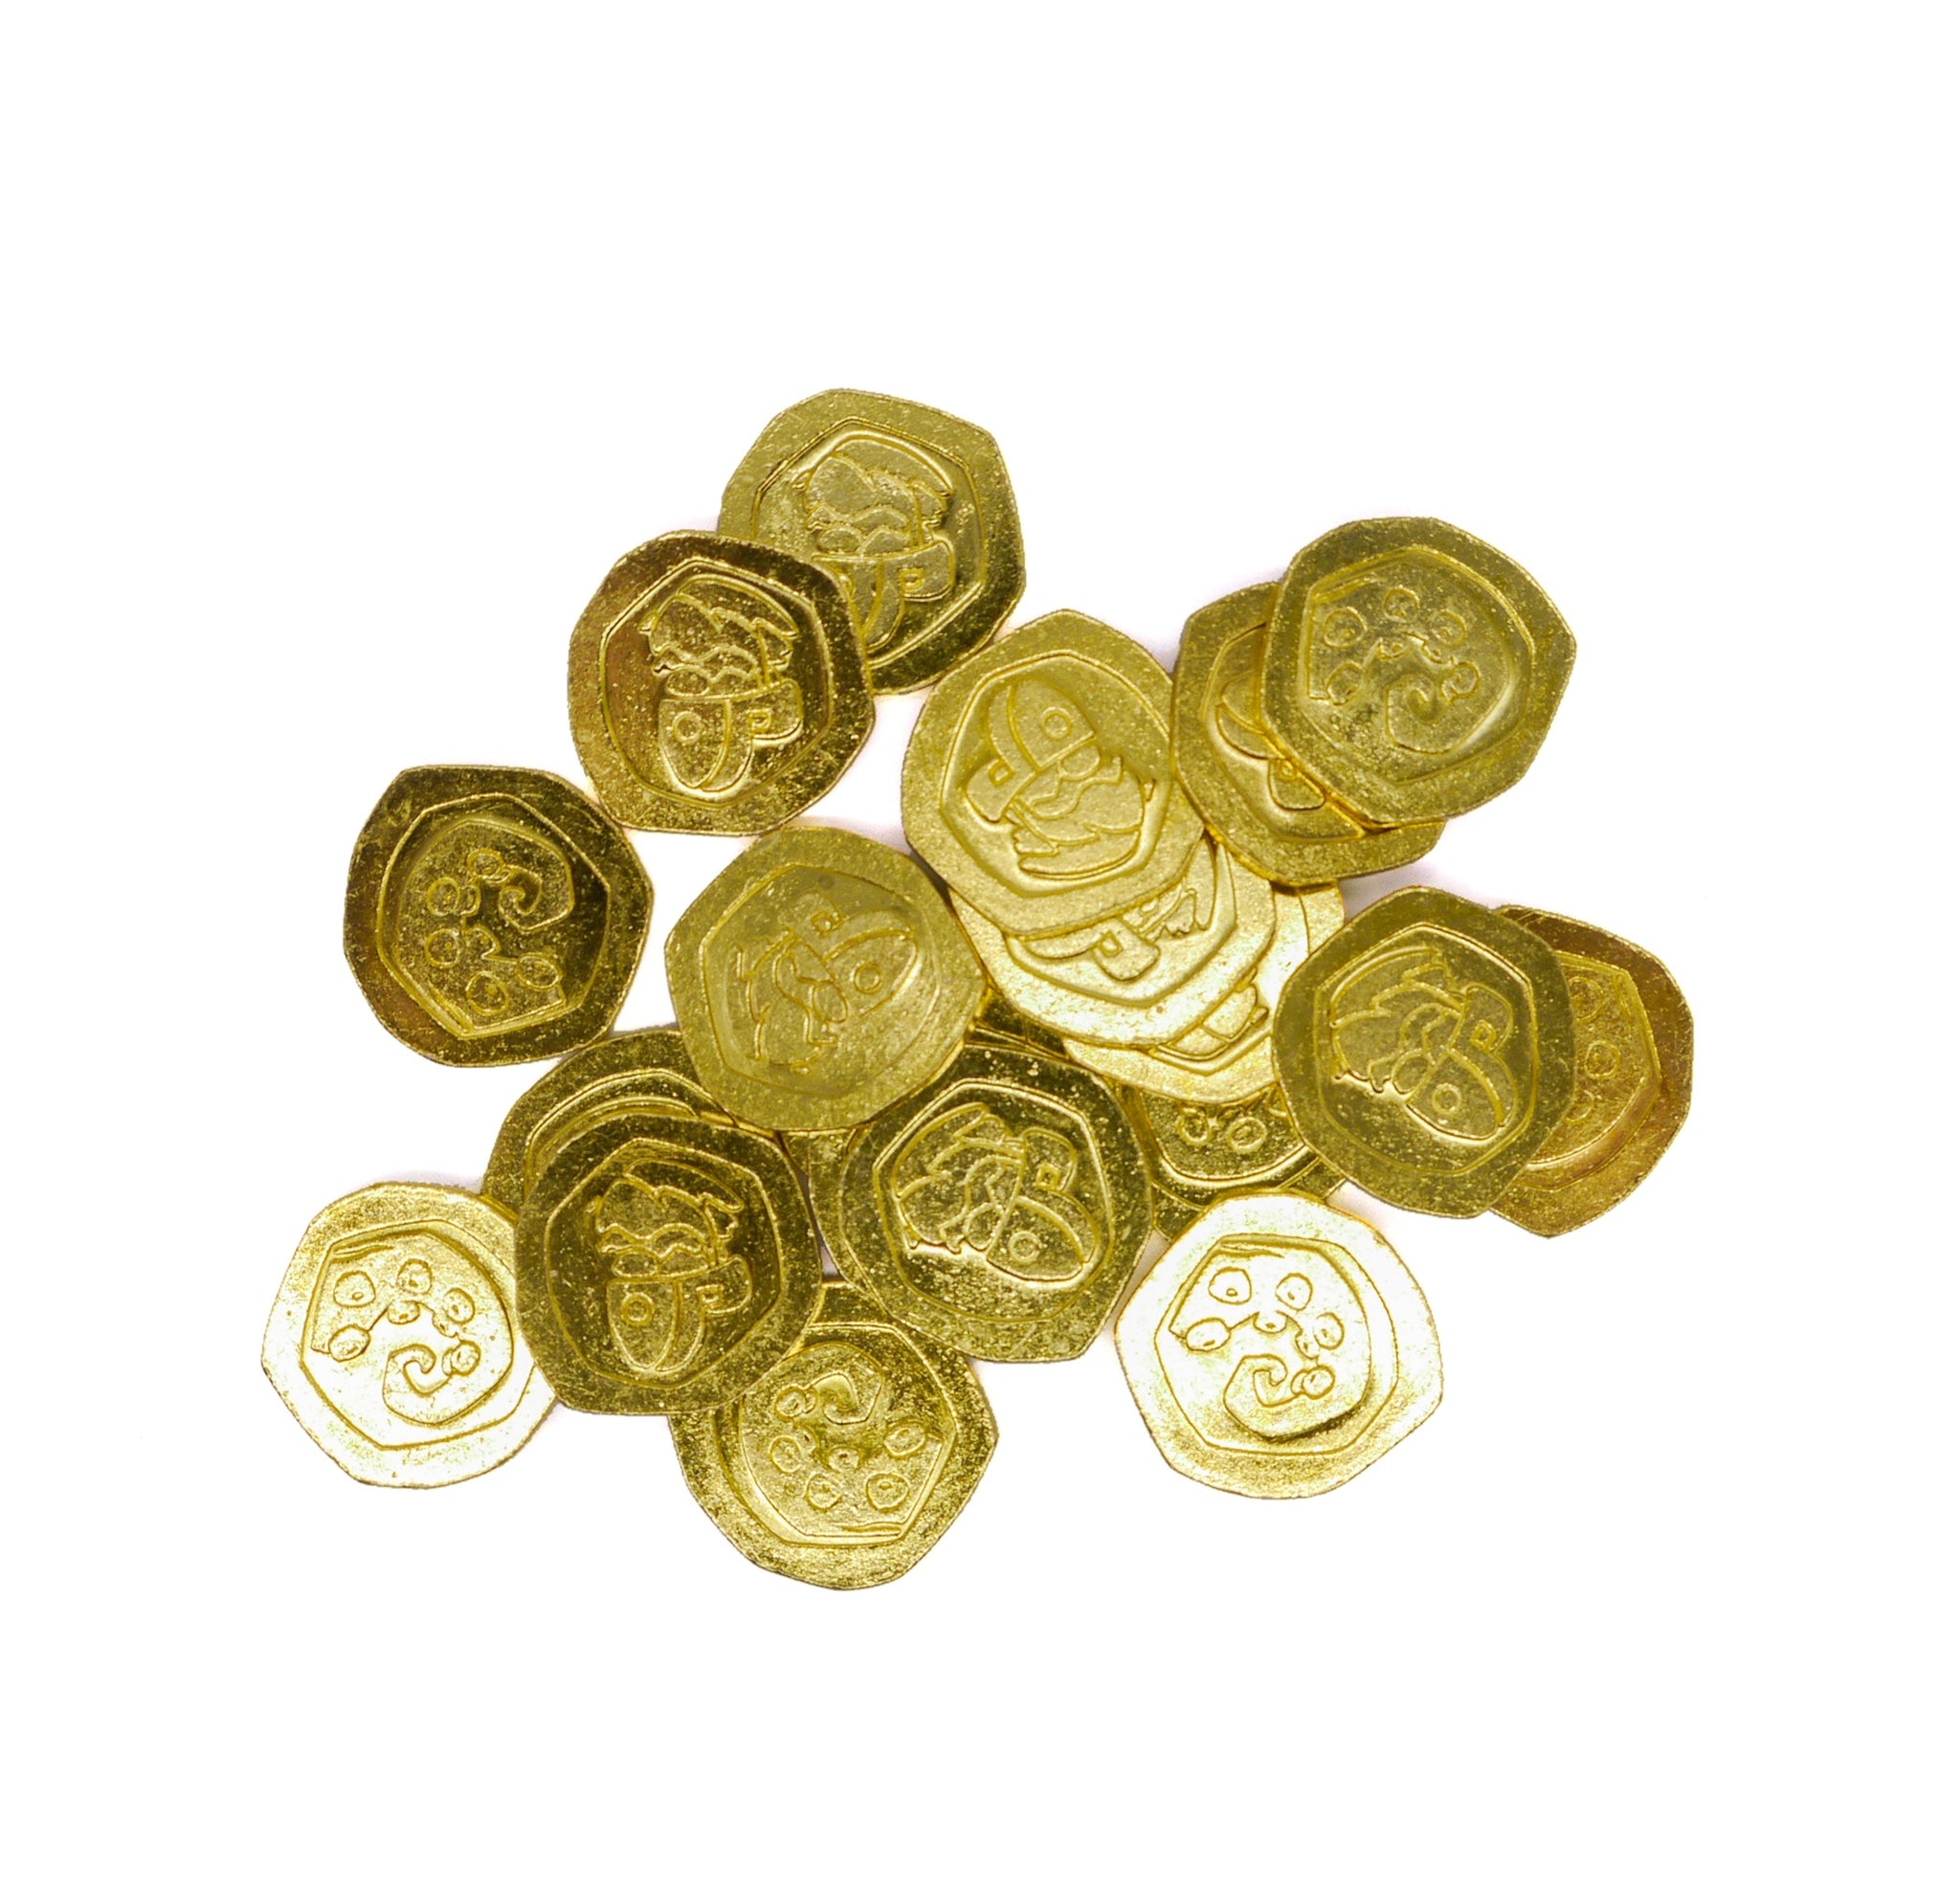 Deluxe Gold Coins for Tentacle Town